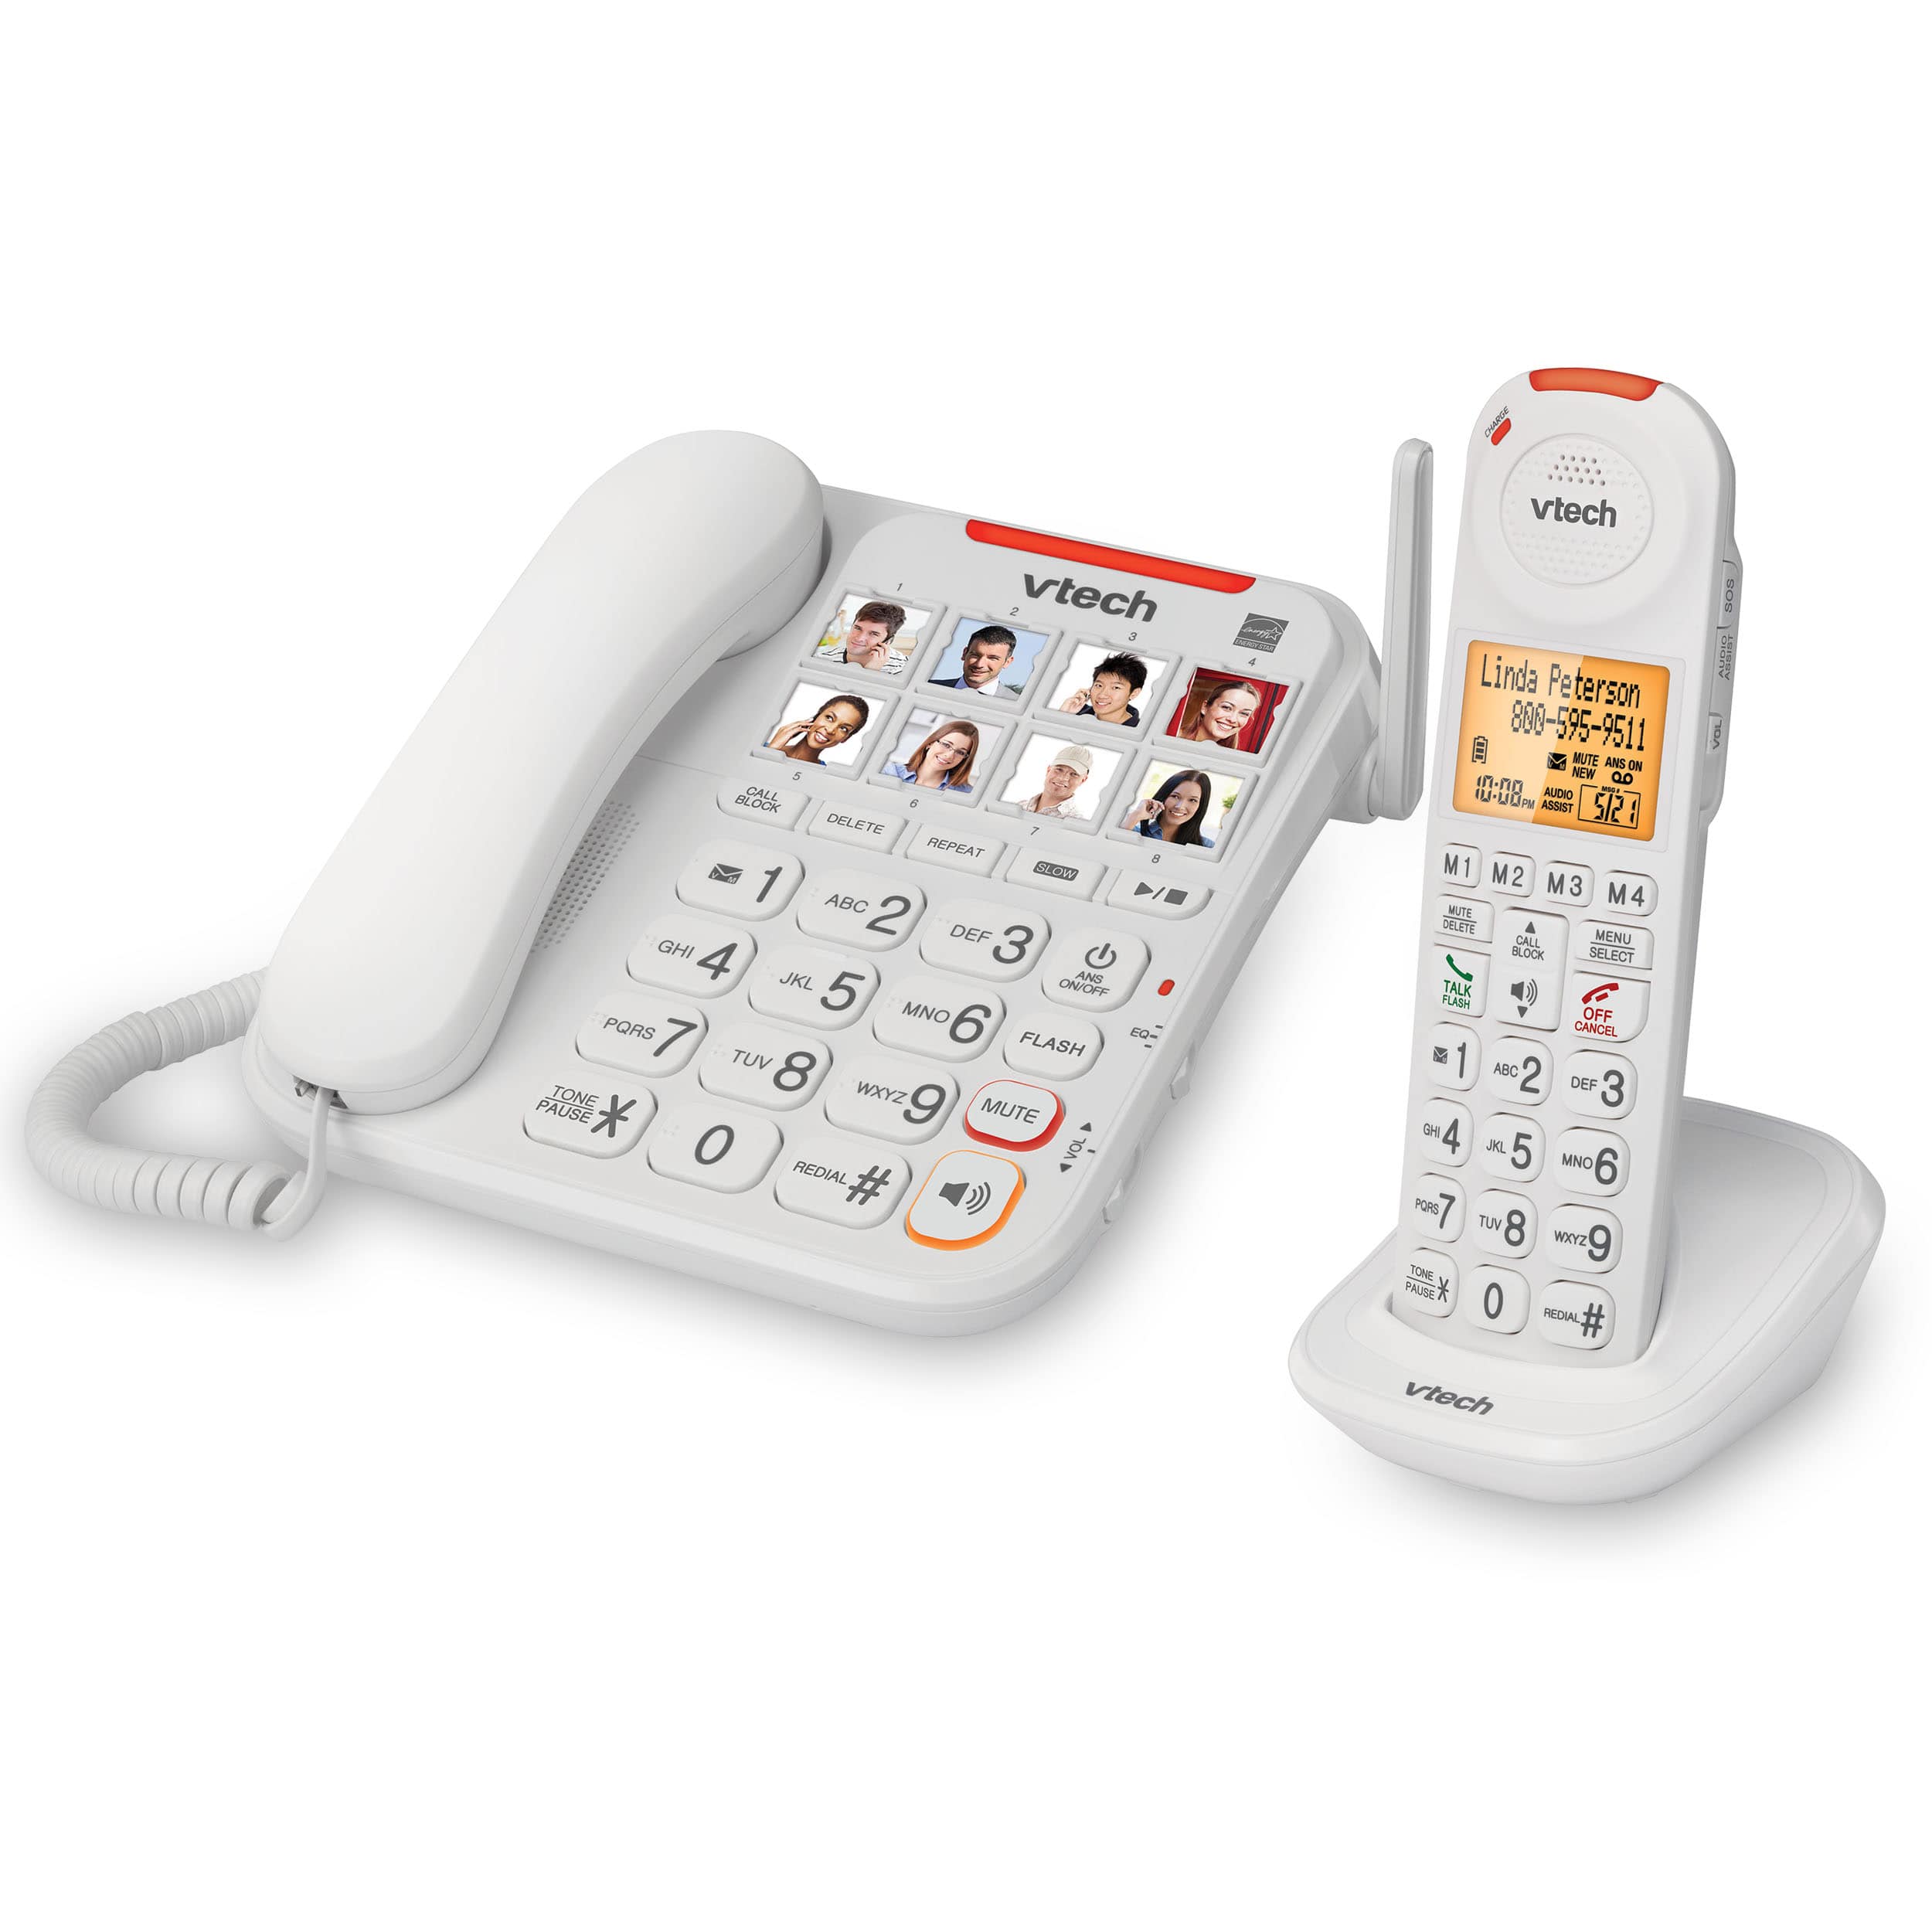 Amplified Corded/Cordless Phone with Answering System, Big Buttons, Extra-Loud Ringer & Smart Call Blocker - view 2